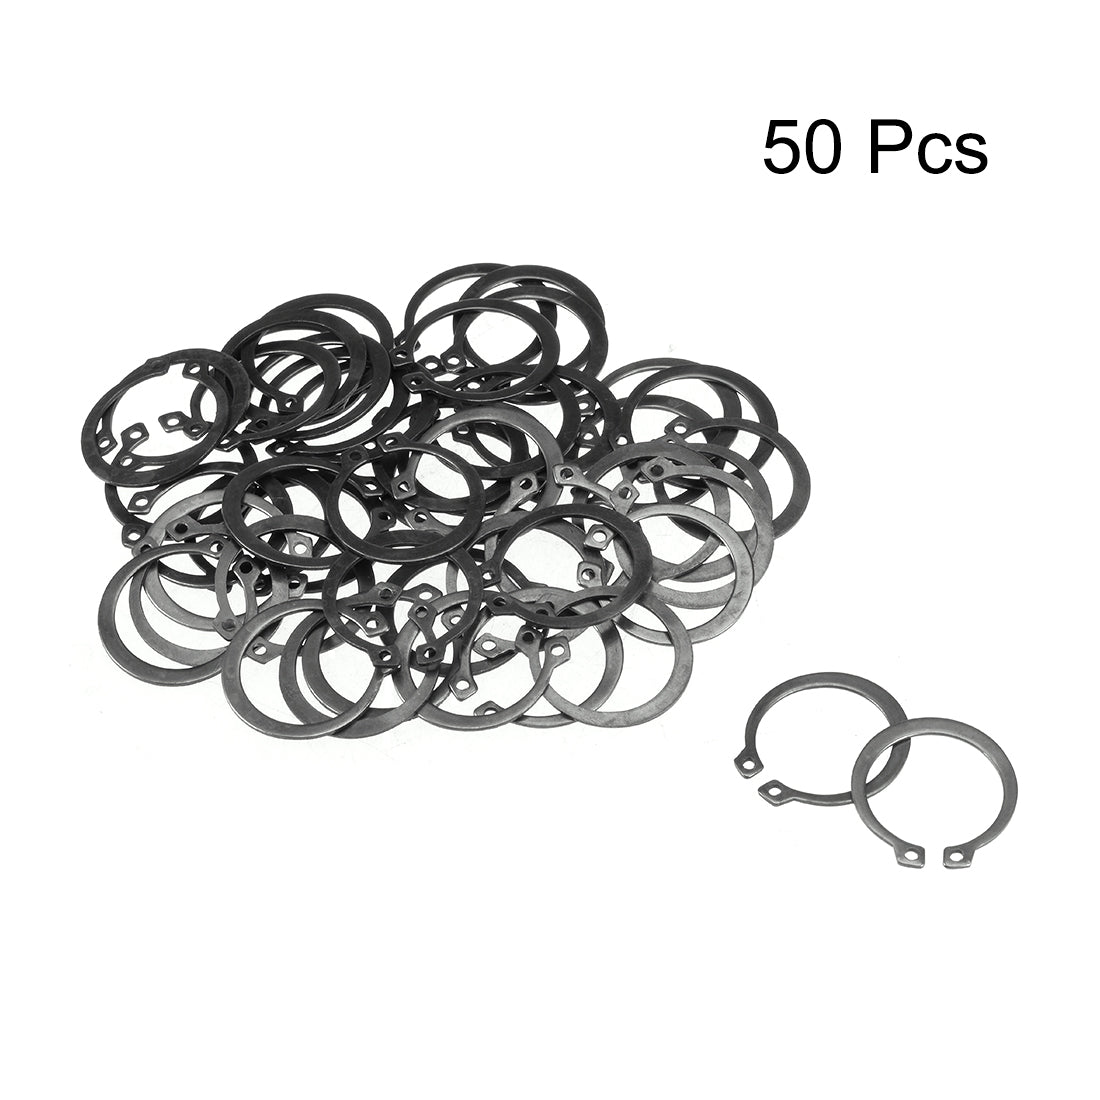 uxcell Uxcell 31.3mm External Circlips C-Clip Retaining Shaft Snap Rings 65Mn 50pcs